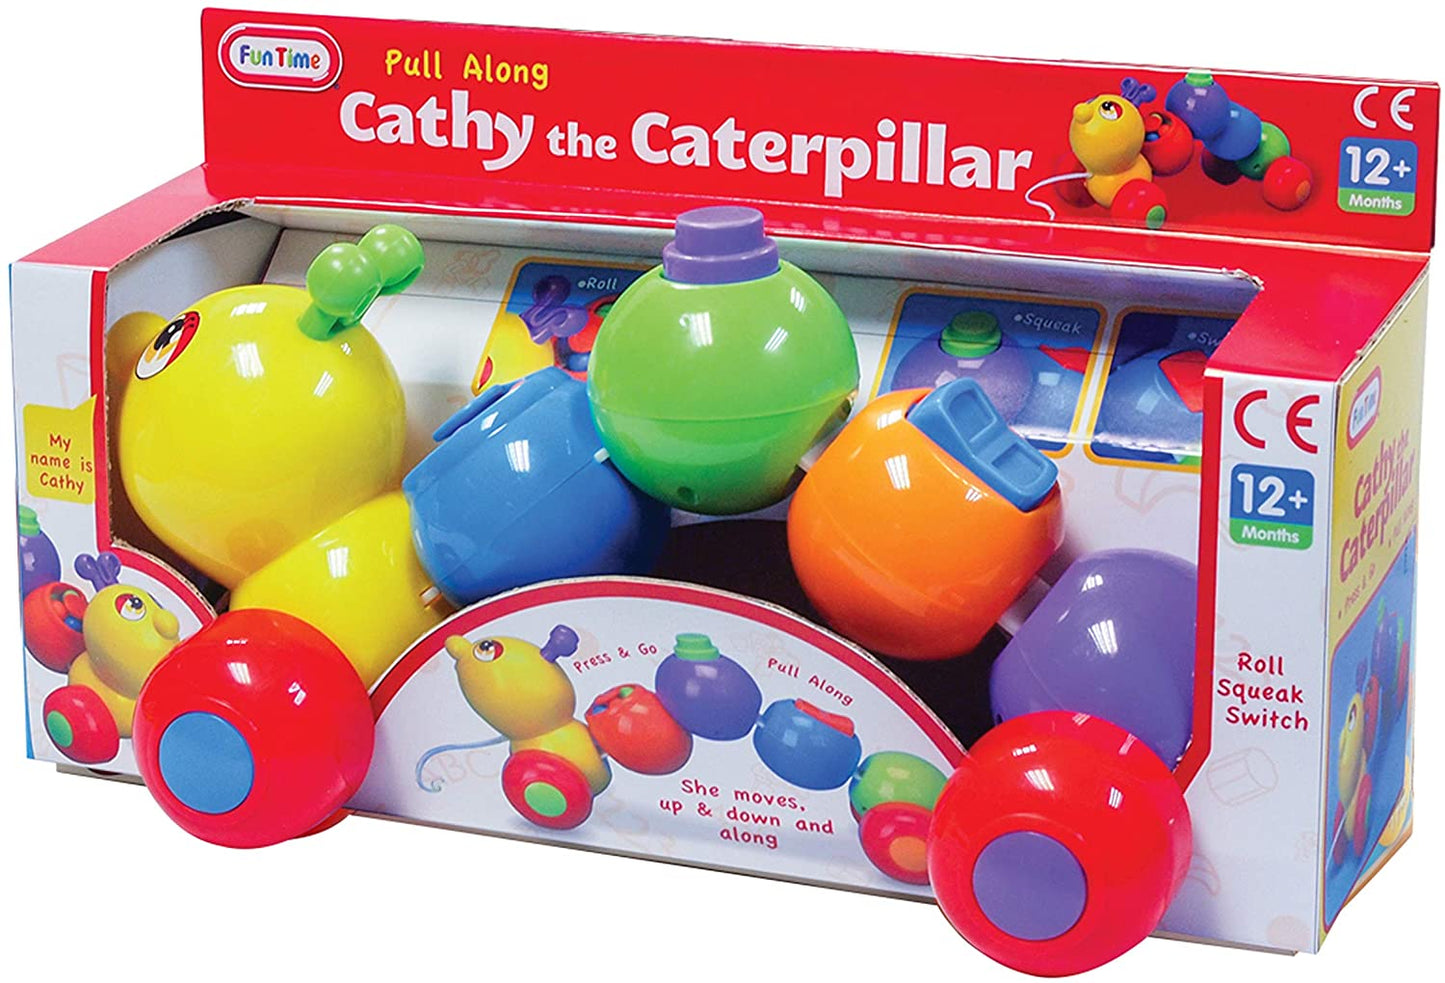 Pull Along Cathy The Caterpillar Baby Toy